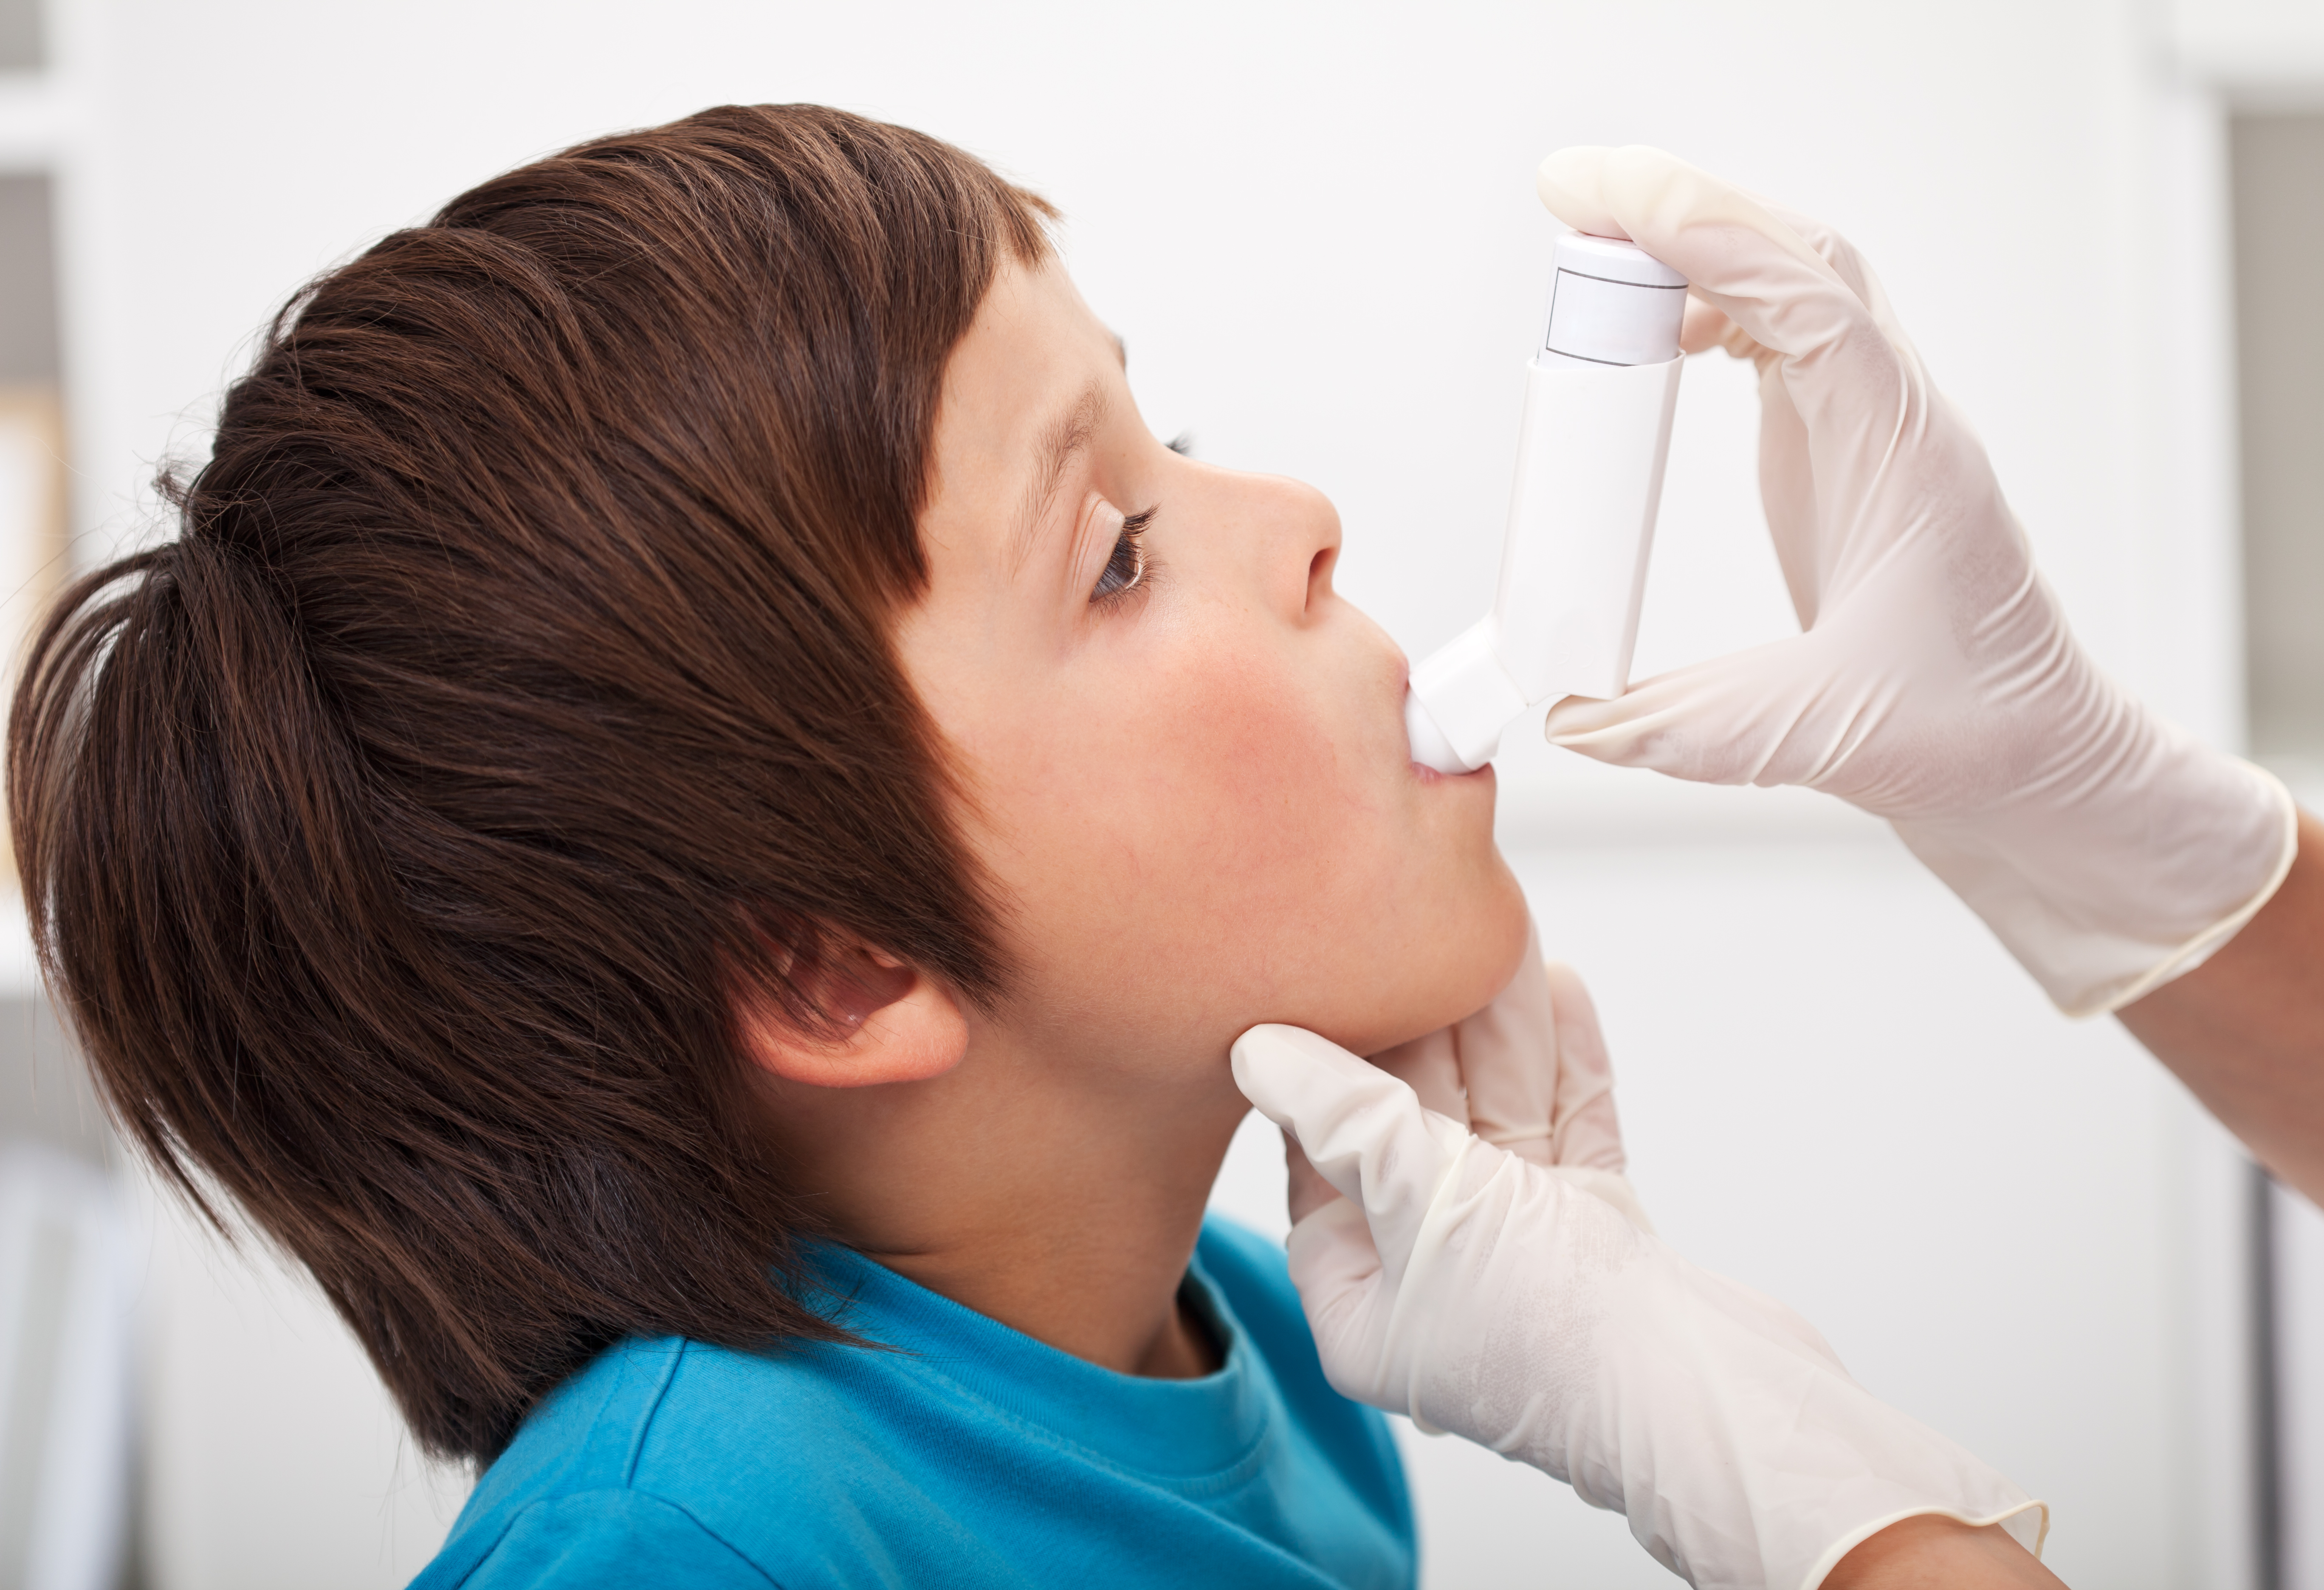 Chicago-based Clinical Trial Exploring Coordinated Healthcare Interventions for Childhood Asthma